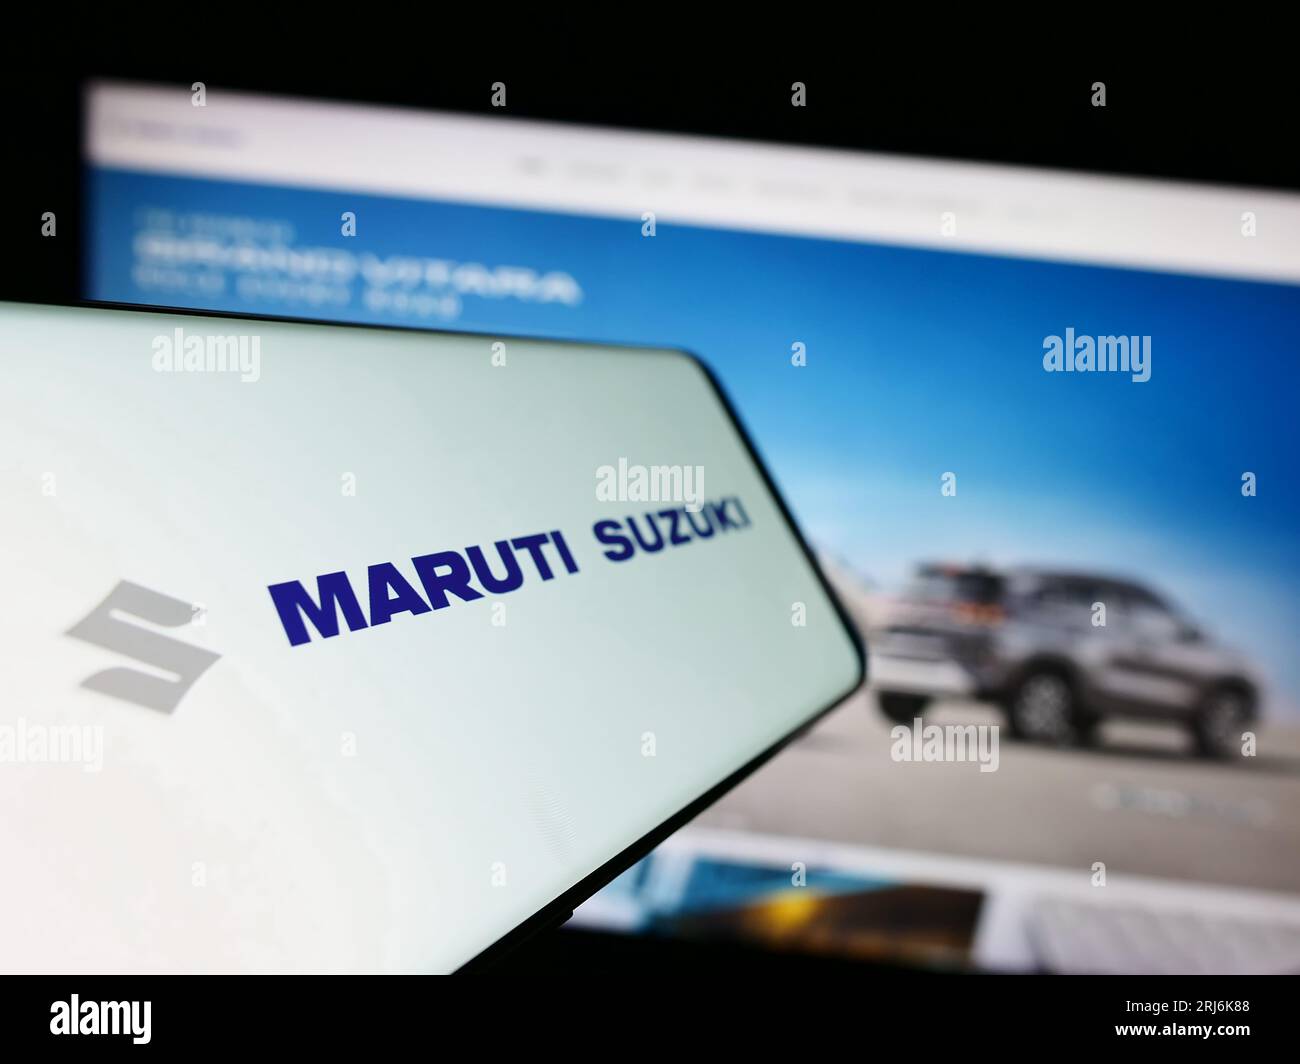 Smartphone with logo of Indian company Maruti Suzuki India Limited on screen in front of business website. Focus on center-left of phone display. Stock Photo